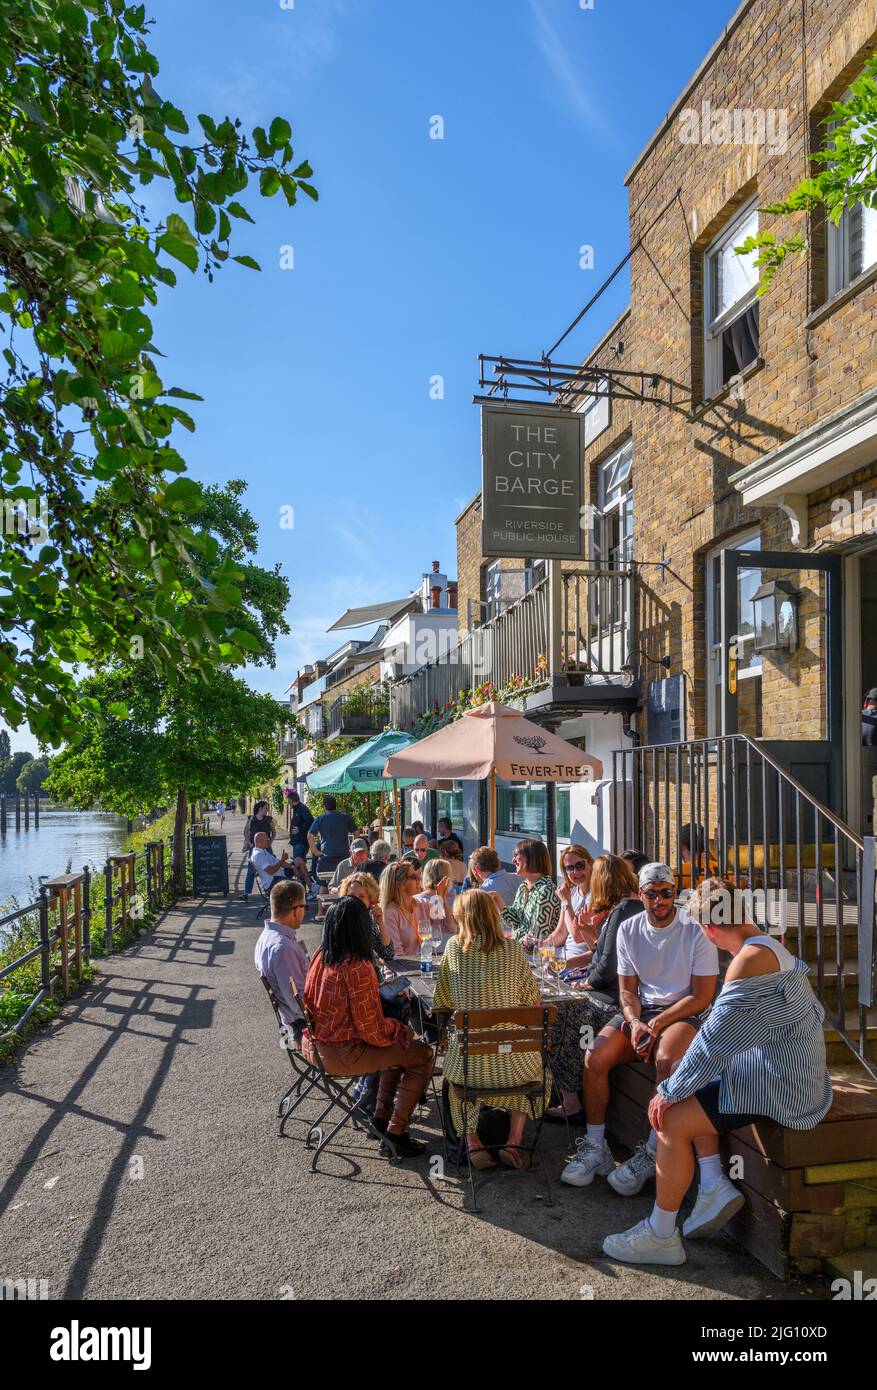 The City Barge Pub an der Themse in Chiswick, London, England, Großbritannien Stockfoto